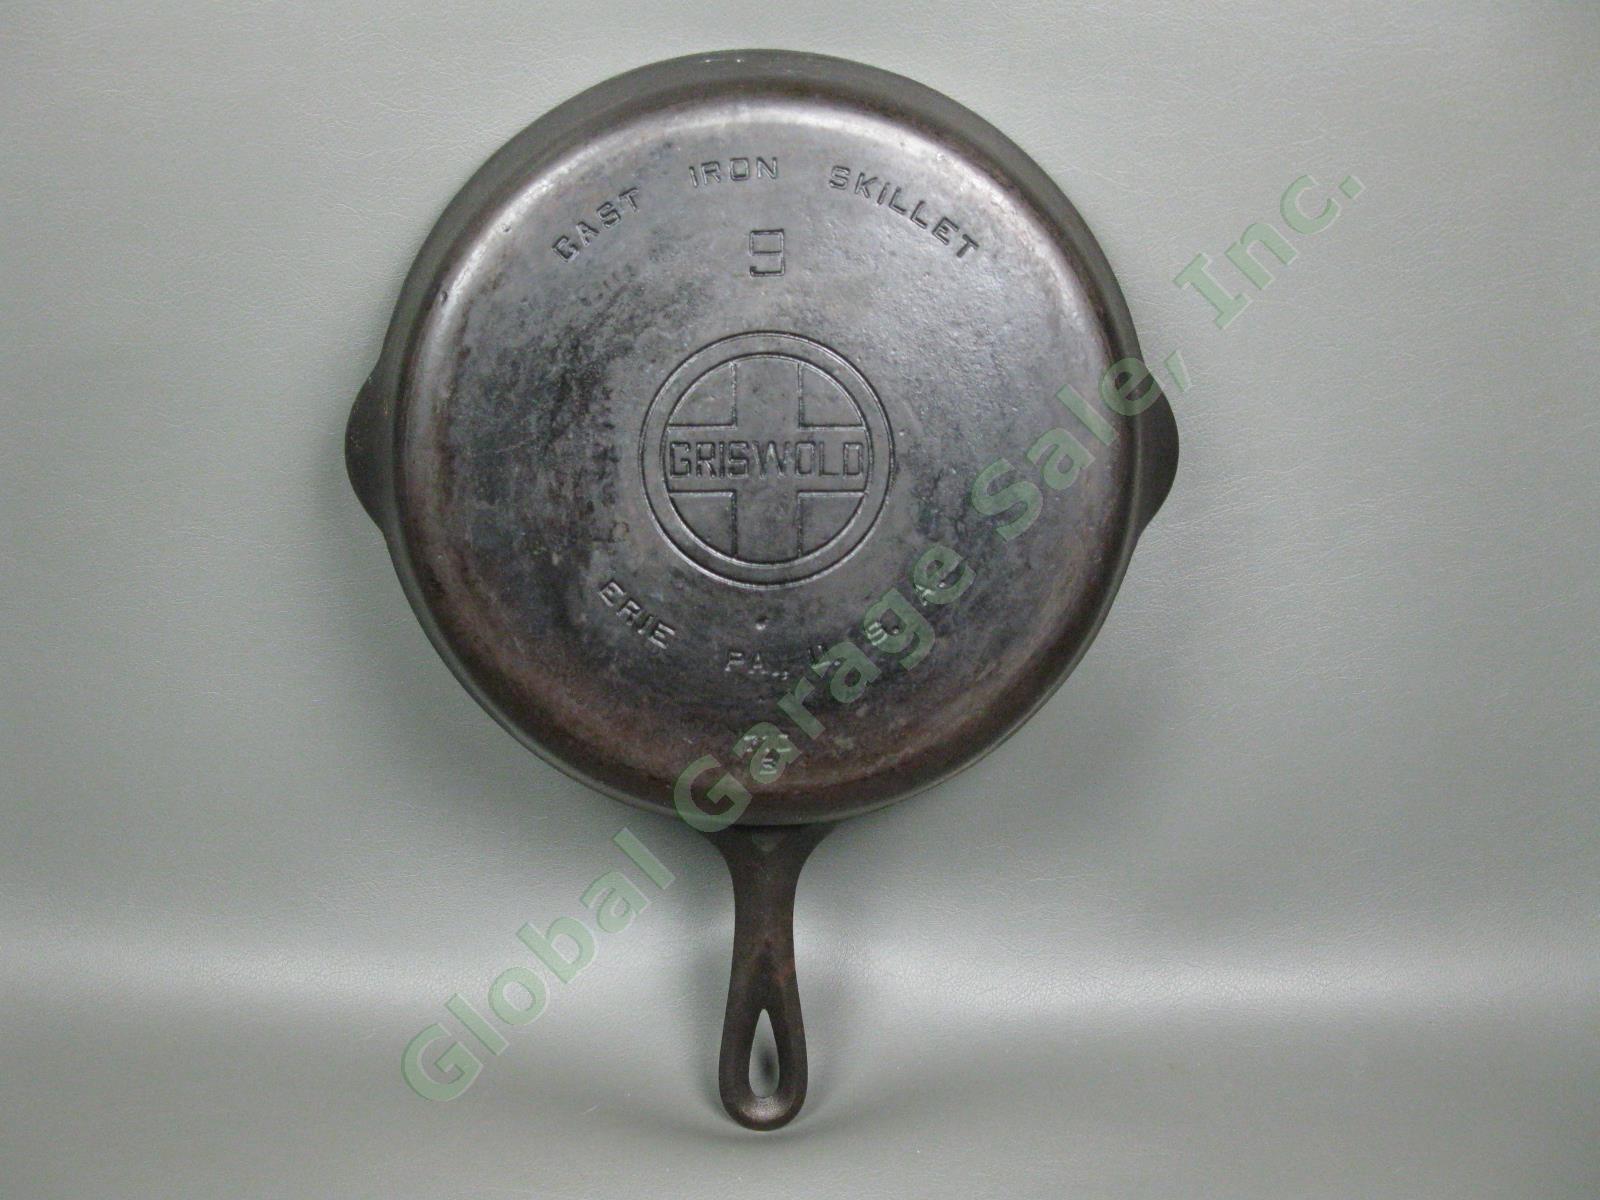 Vintage Griswold No-9 710-B Large Cast Iron Frying Pan Skillet Cookware Erie PA